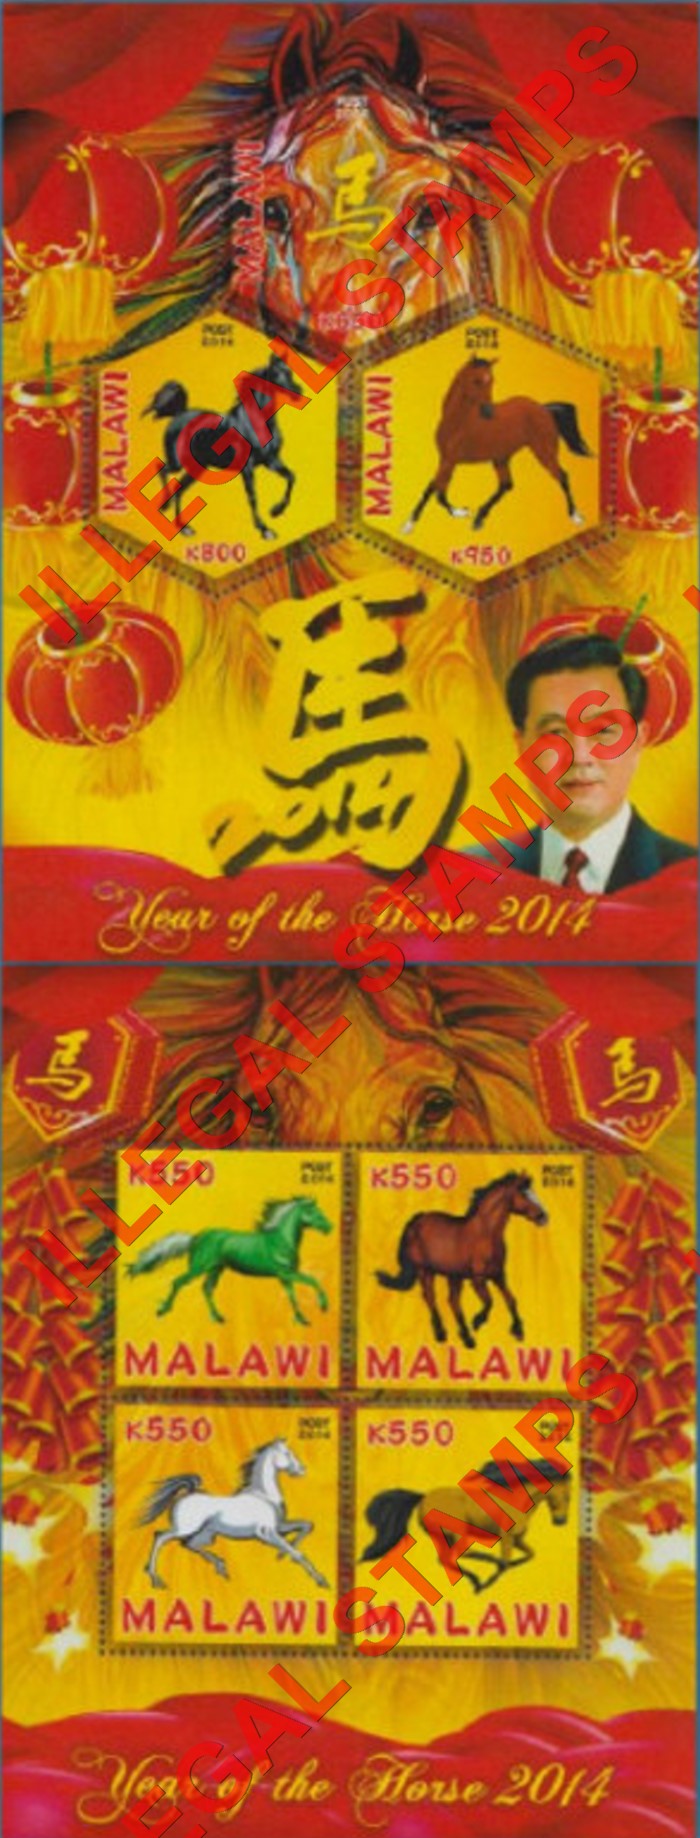 Malawi 2014 Year of the Horse Illegal Stamp Souvenir Sheets of 4 and 3